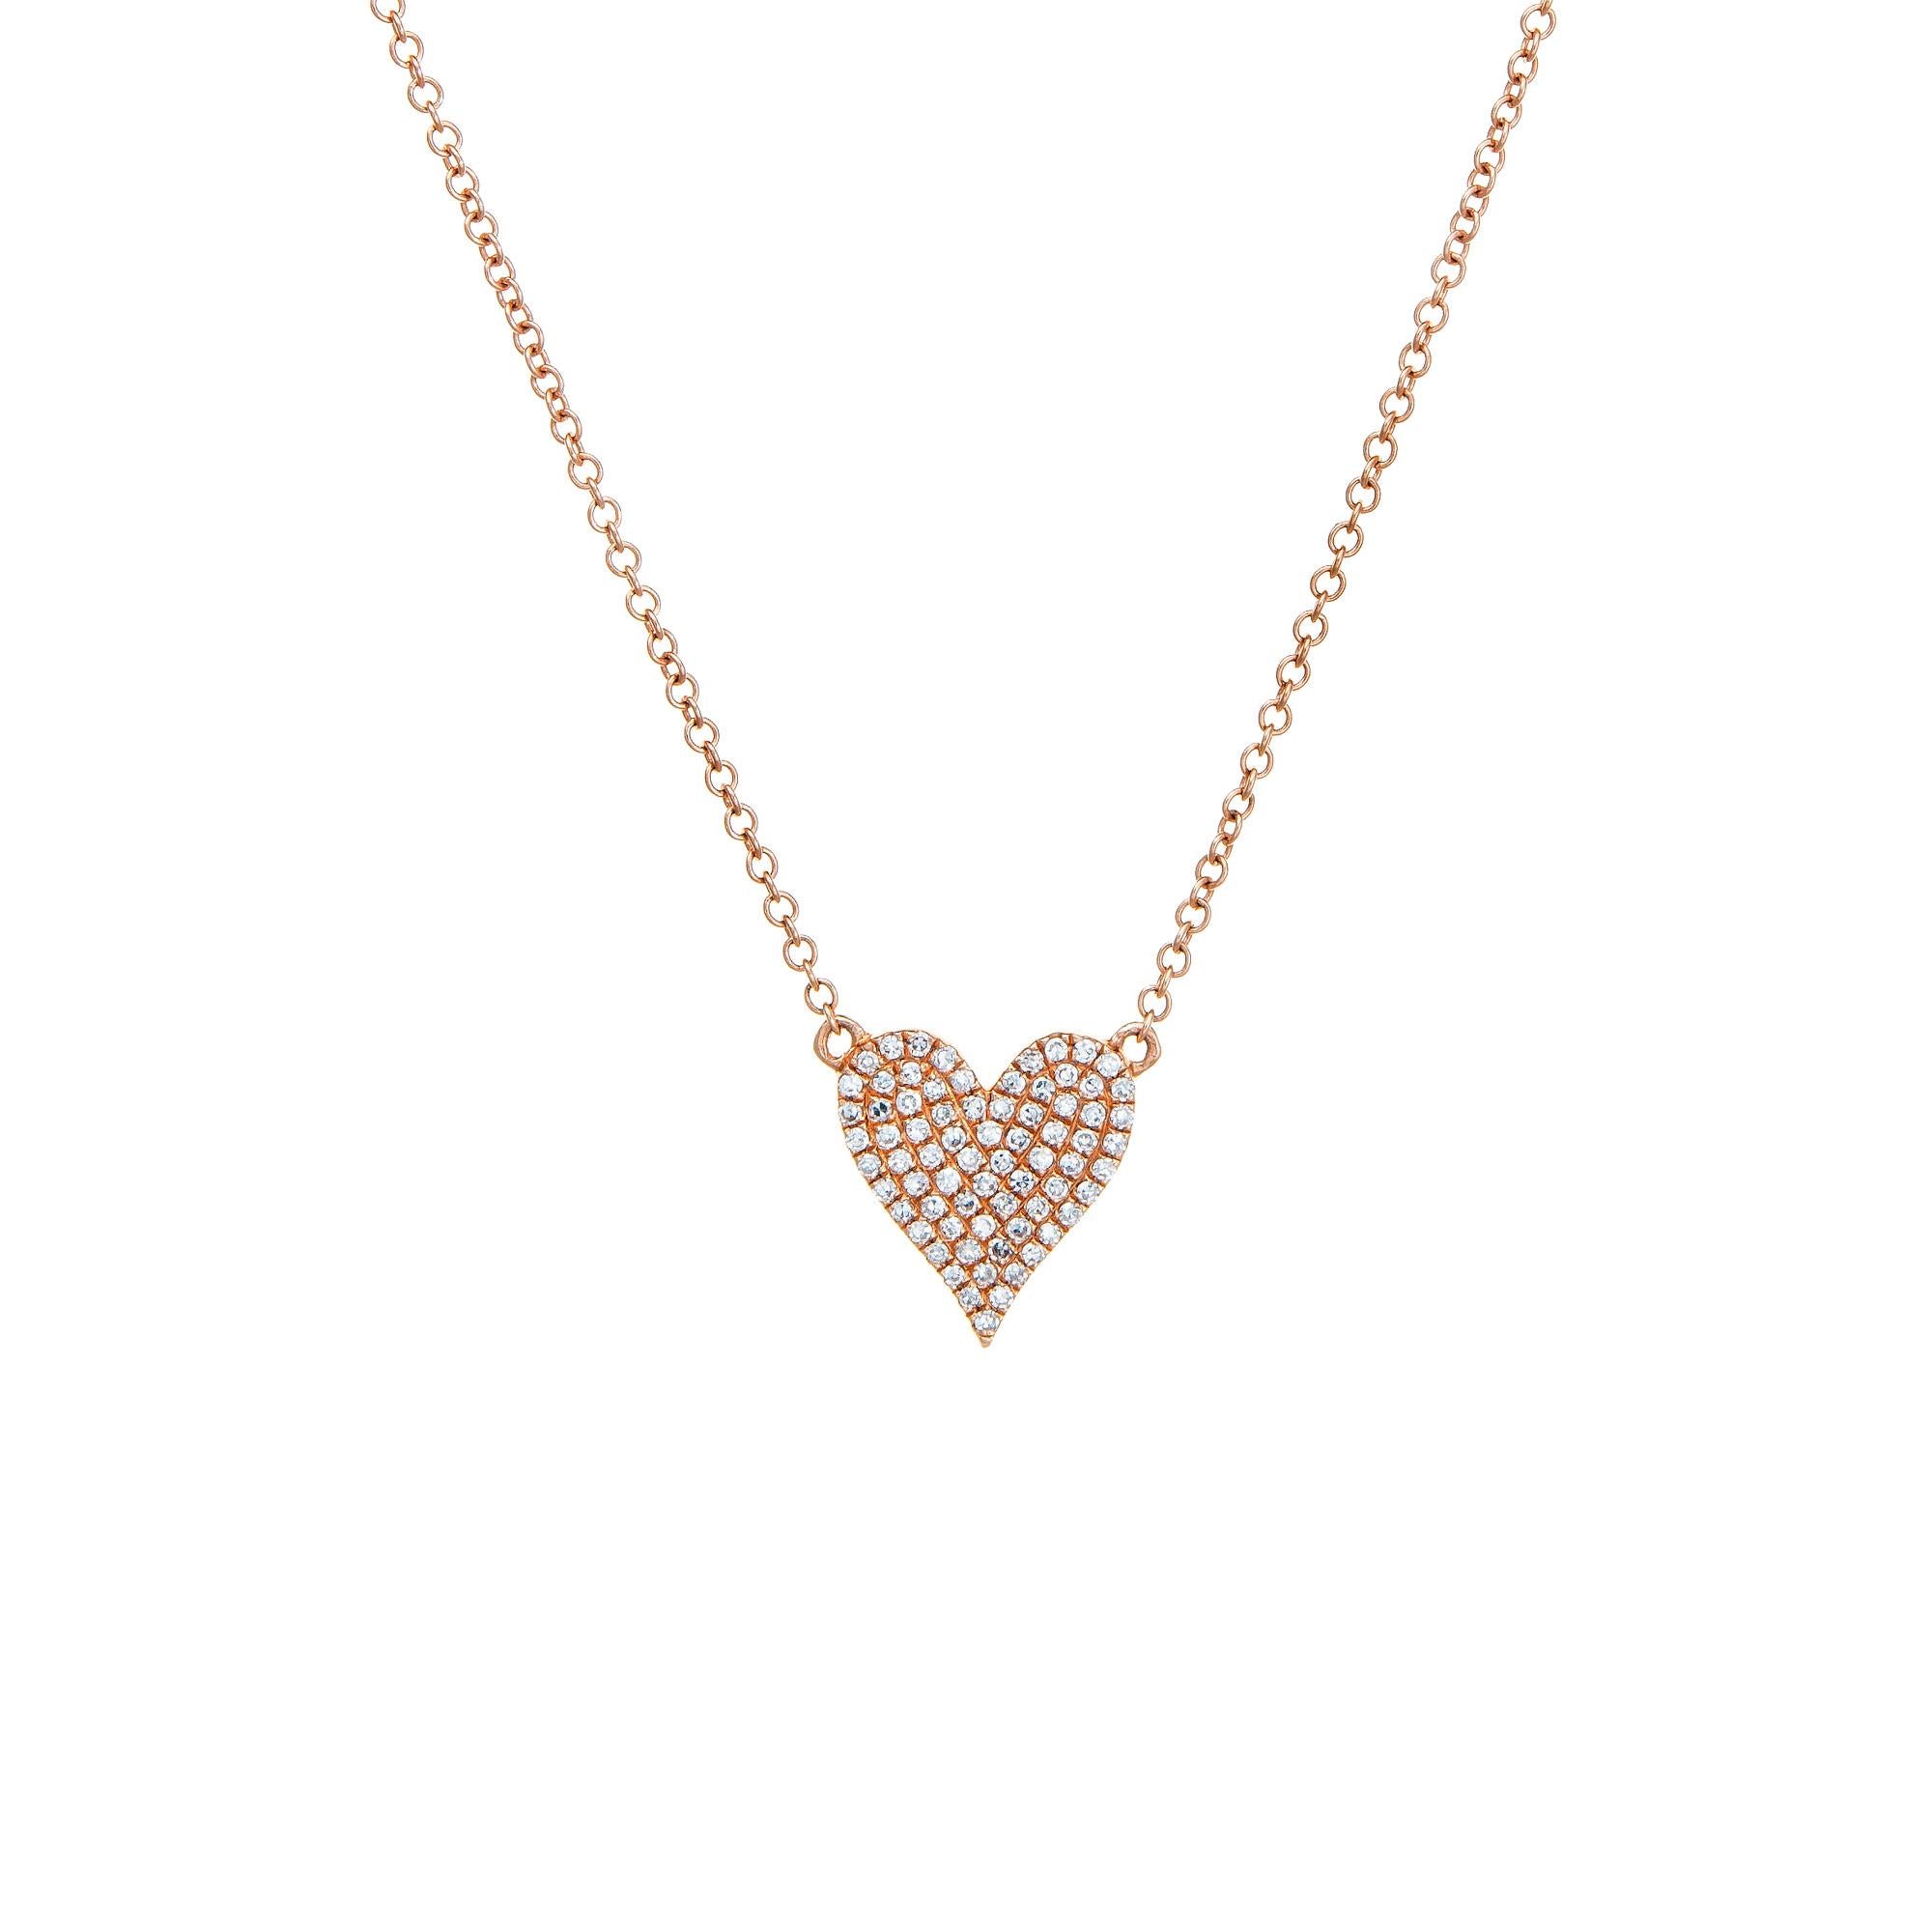 Stylish and finely detailed double sided diamond & ruby heart necklace crafted in 14k rose gold.

Pave set rubies total an estimated 0.16 carats. Pave set diamonds total an estimated 0.16 carats (estimated at G-H color and VS2 clarity).

The